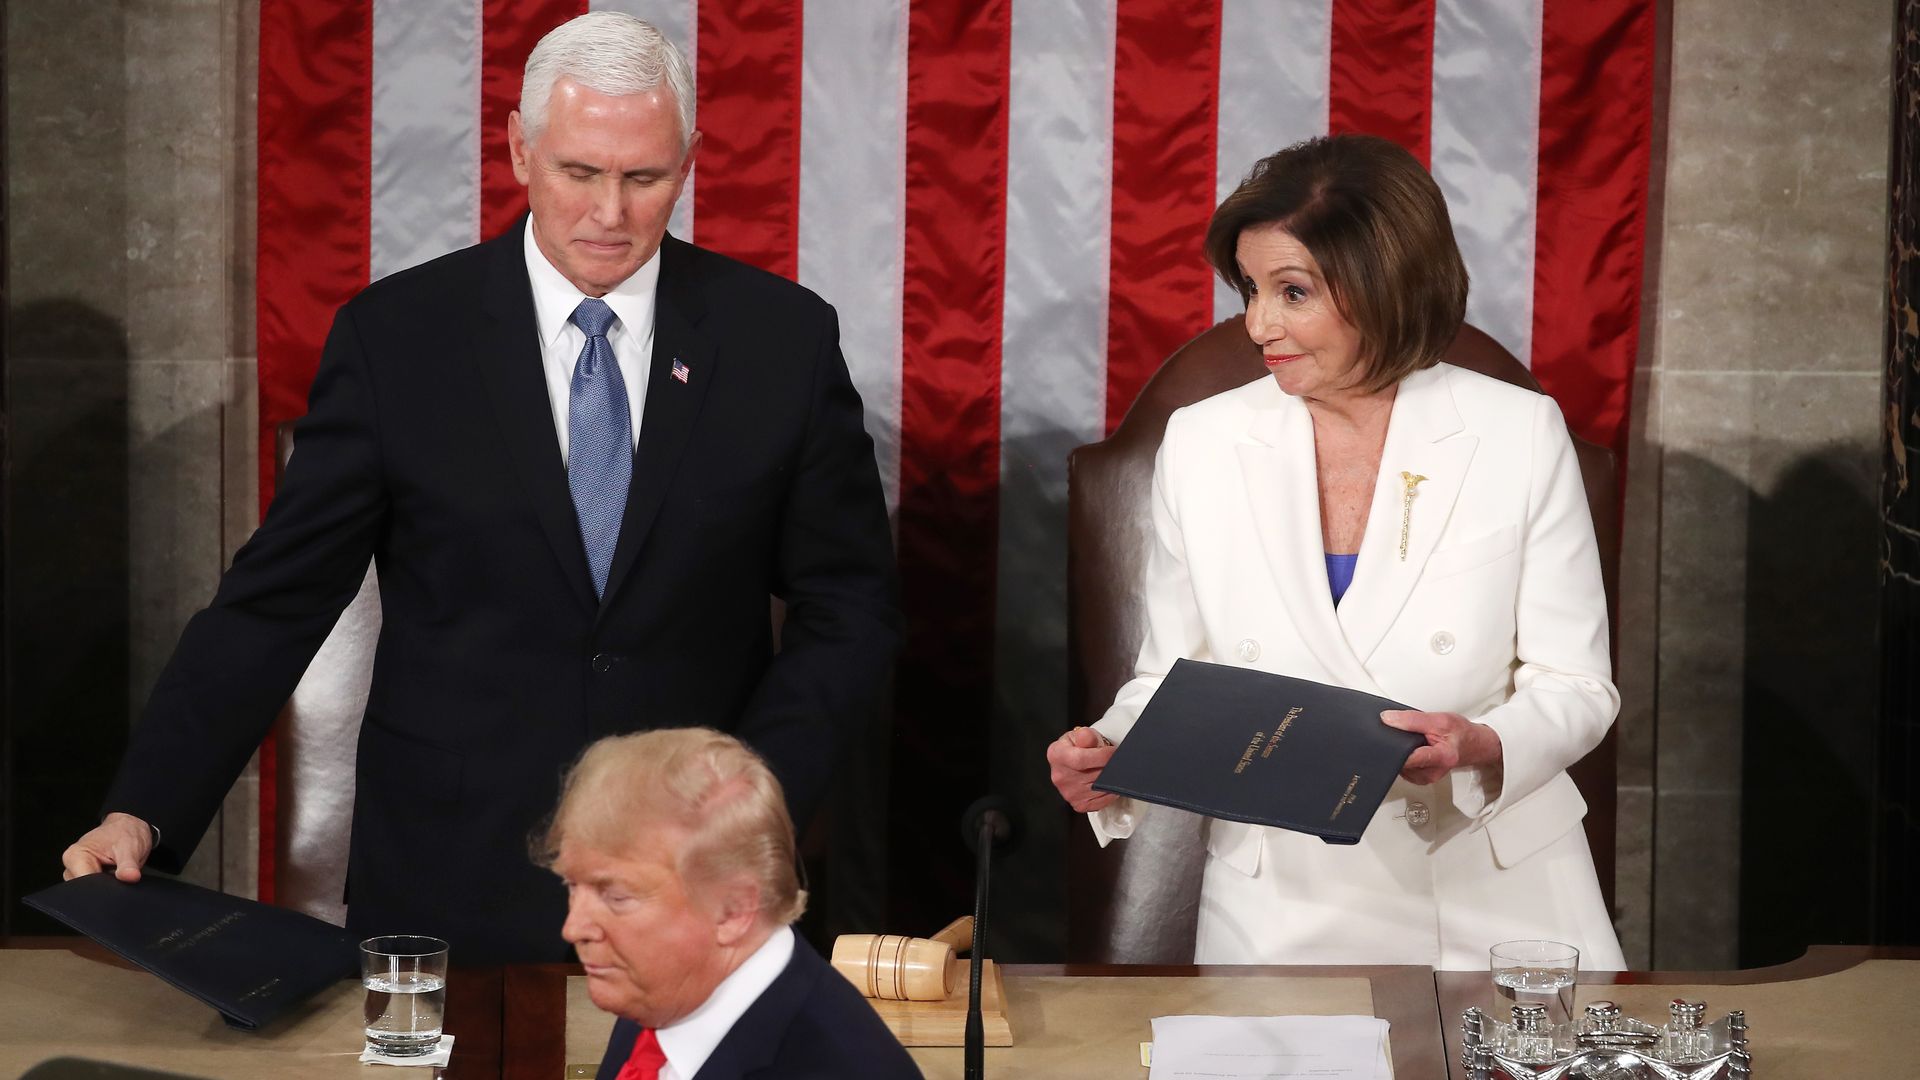 Pence, Pelosi and Trump at state of the union